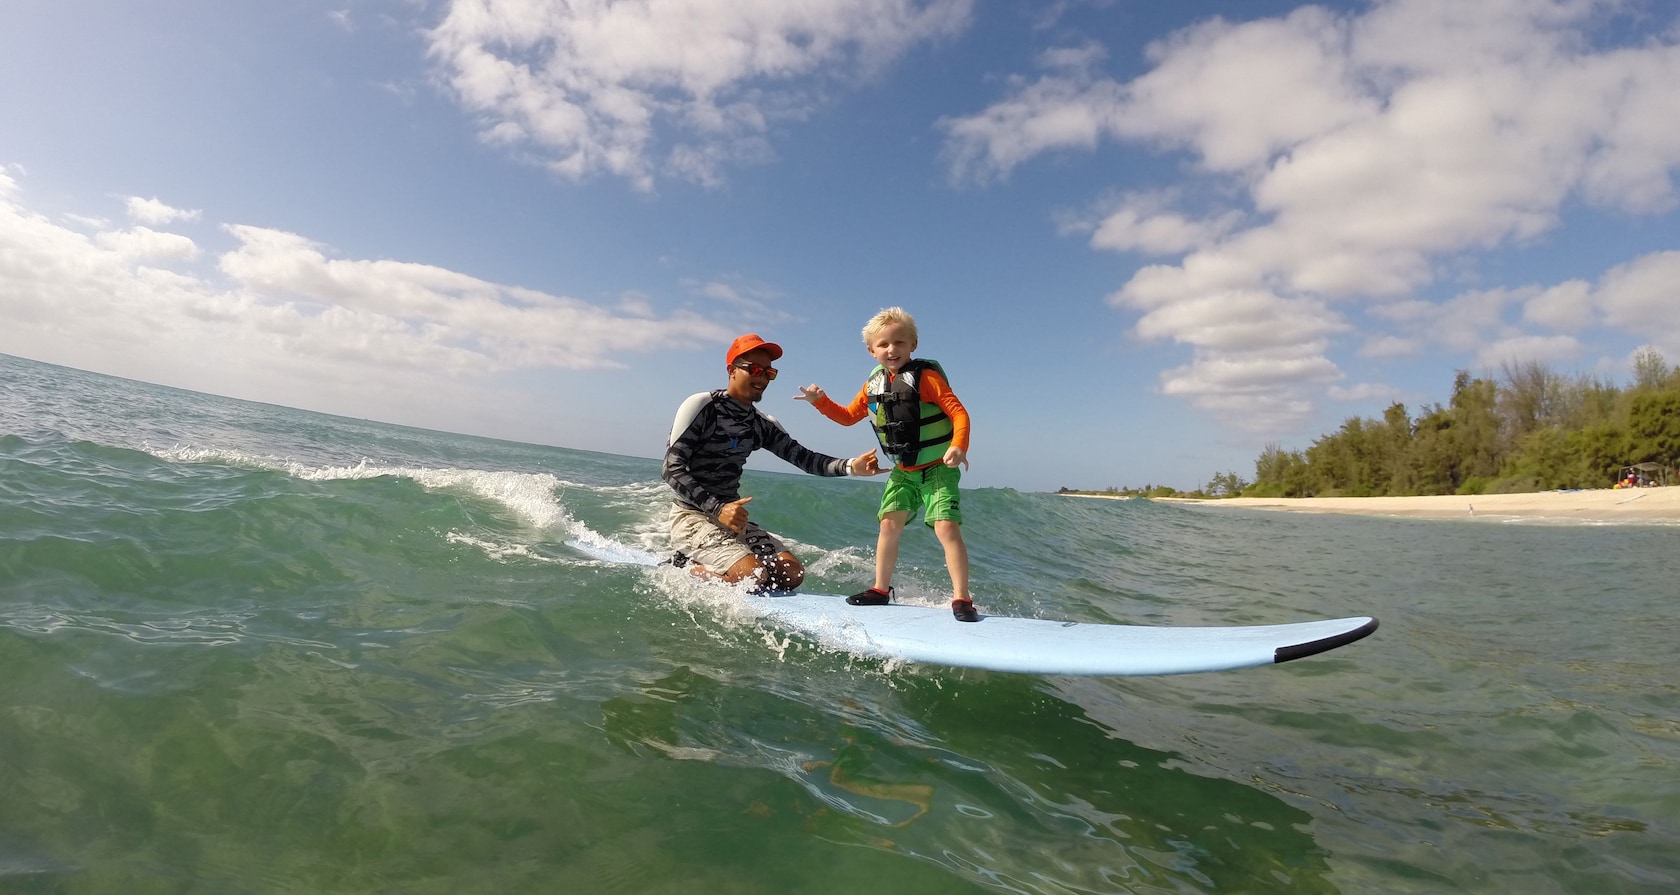 A young boy stands and an instructor kneels on a surfboard atop a breaking wave